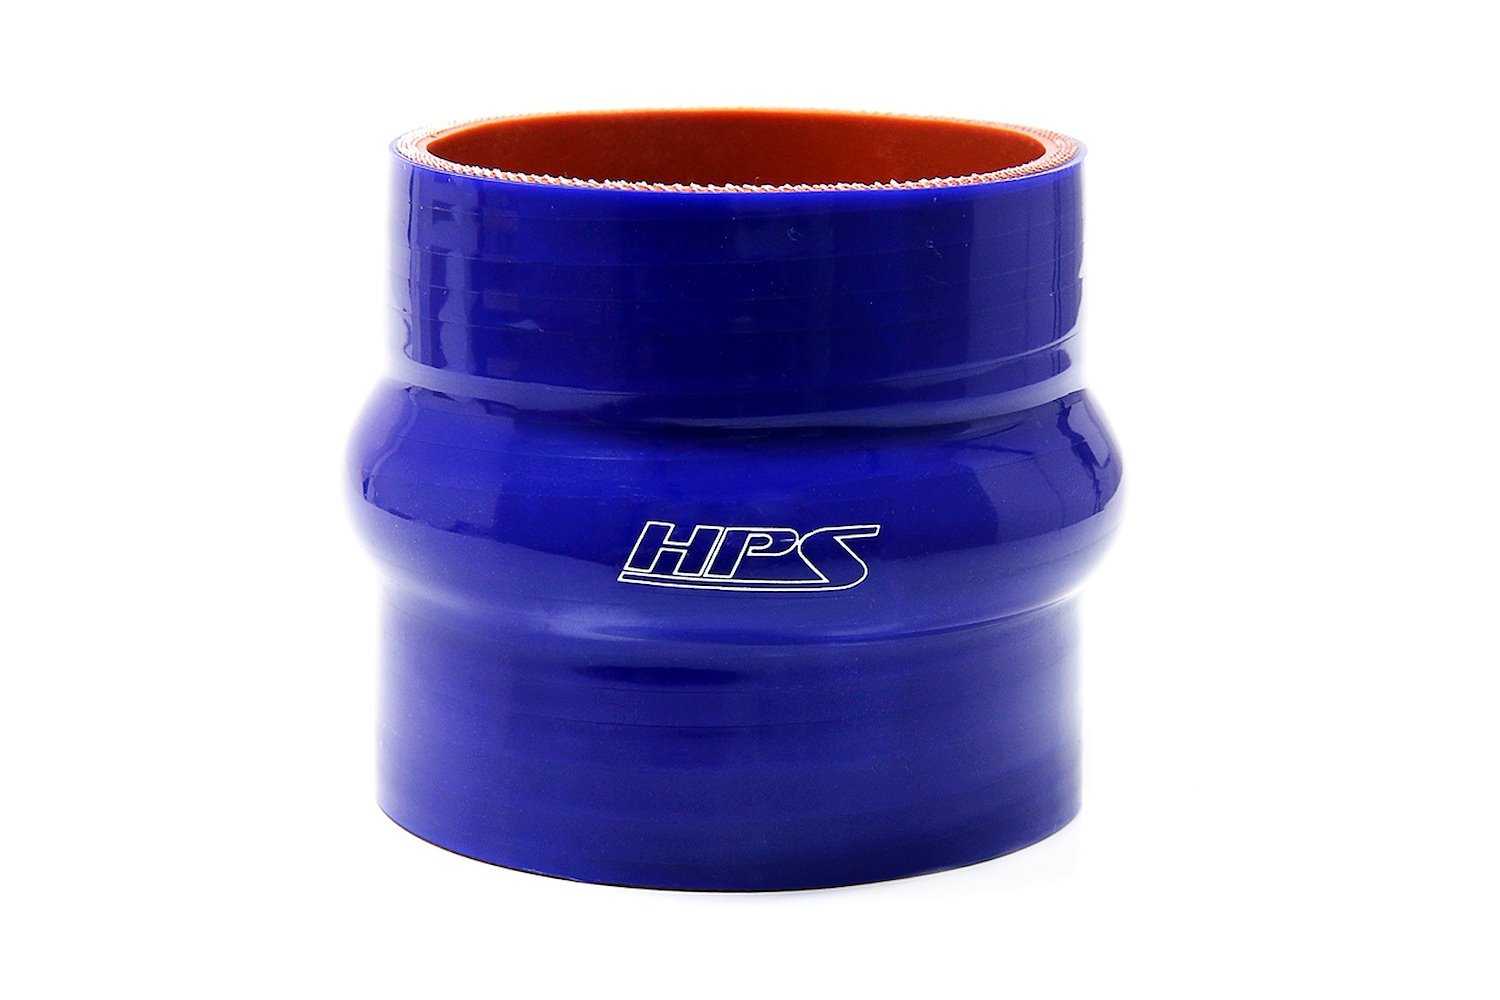 HTSHC-125-L4-BLUE Silicone Hump Coupler Hose, High-Temp 4-Ply Reinforced, 1-1/4 in. ID, 4 in. Long, Blue